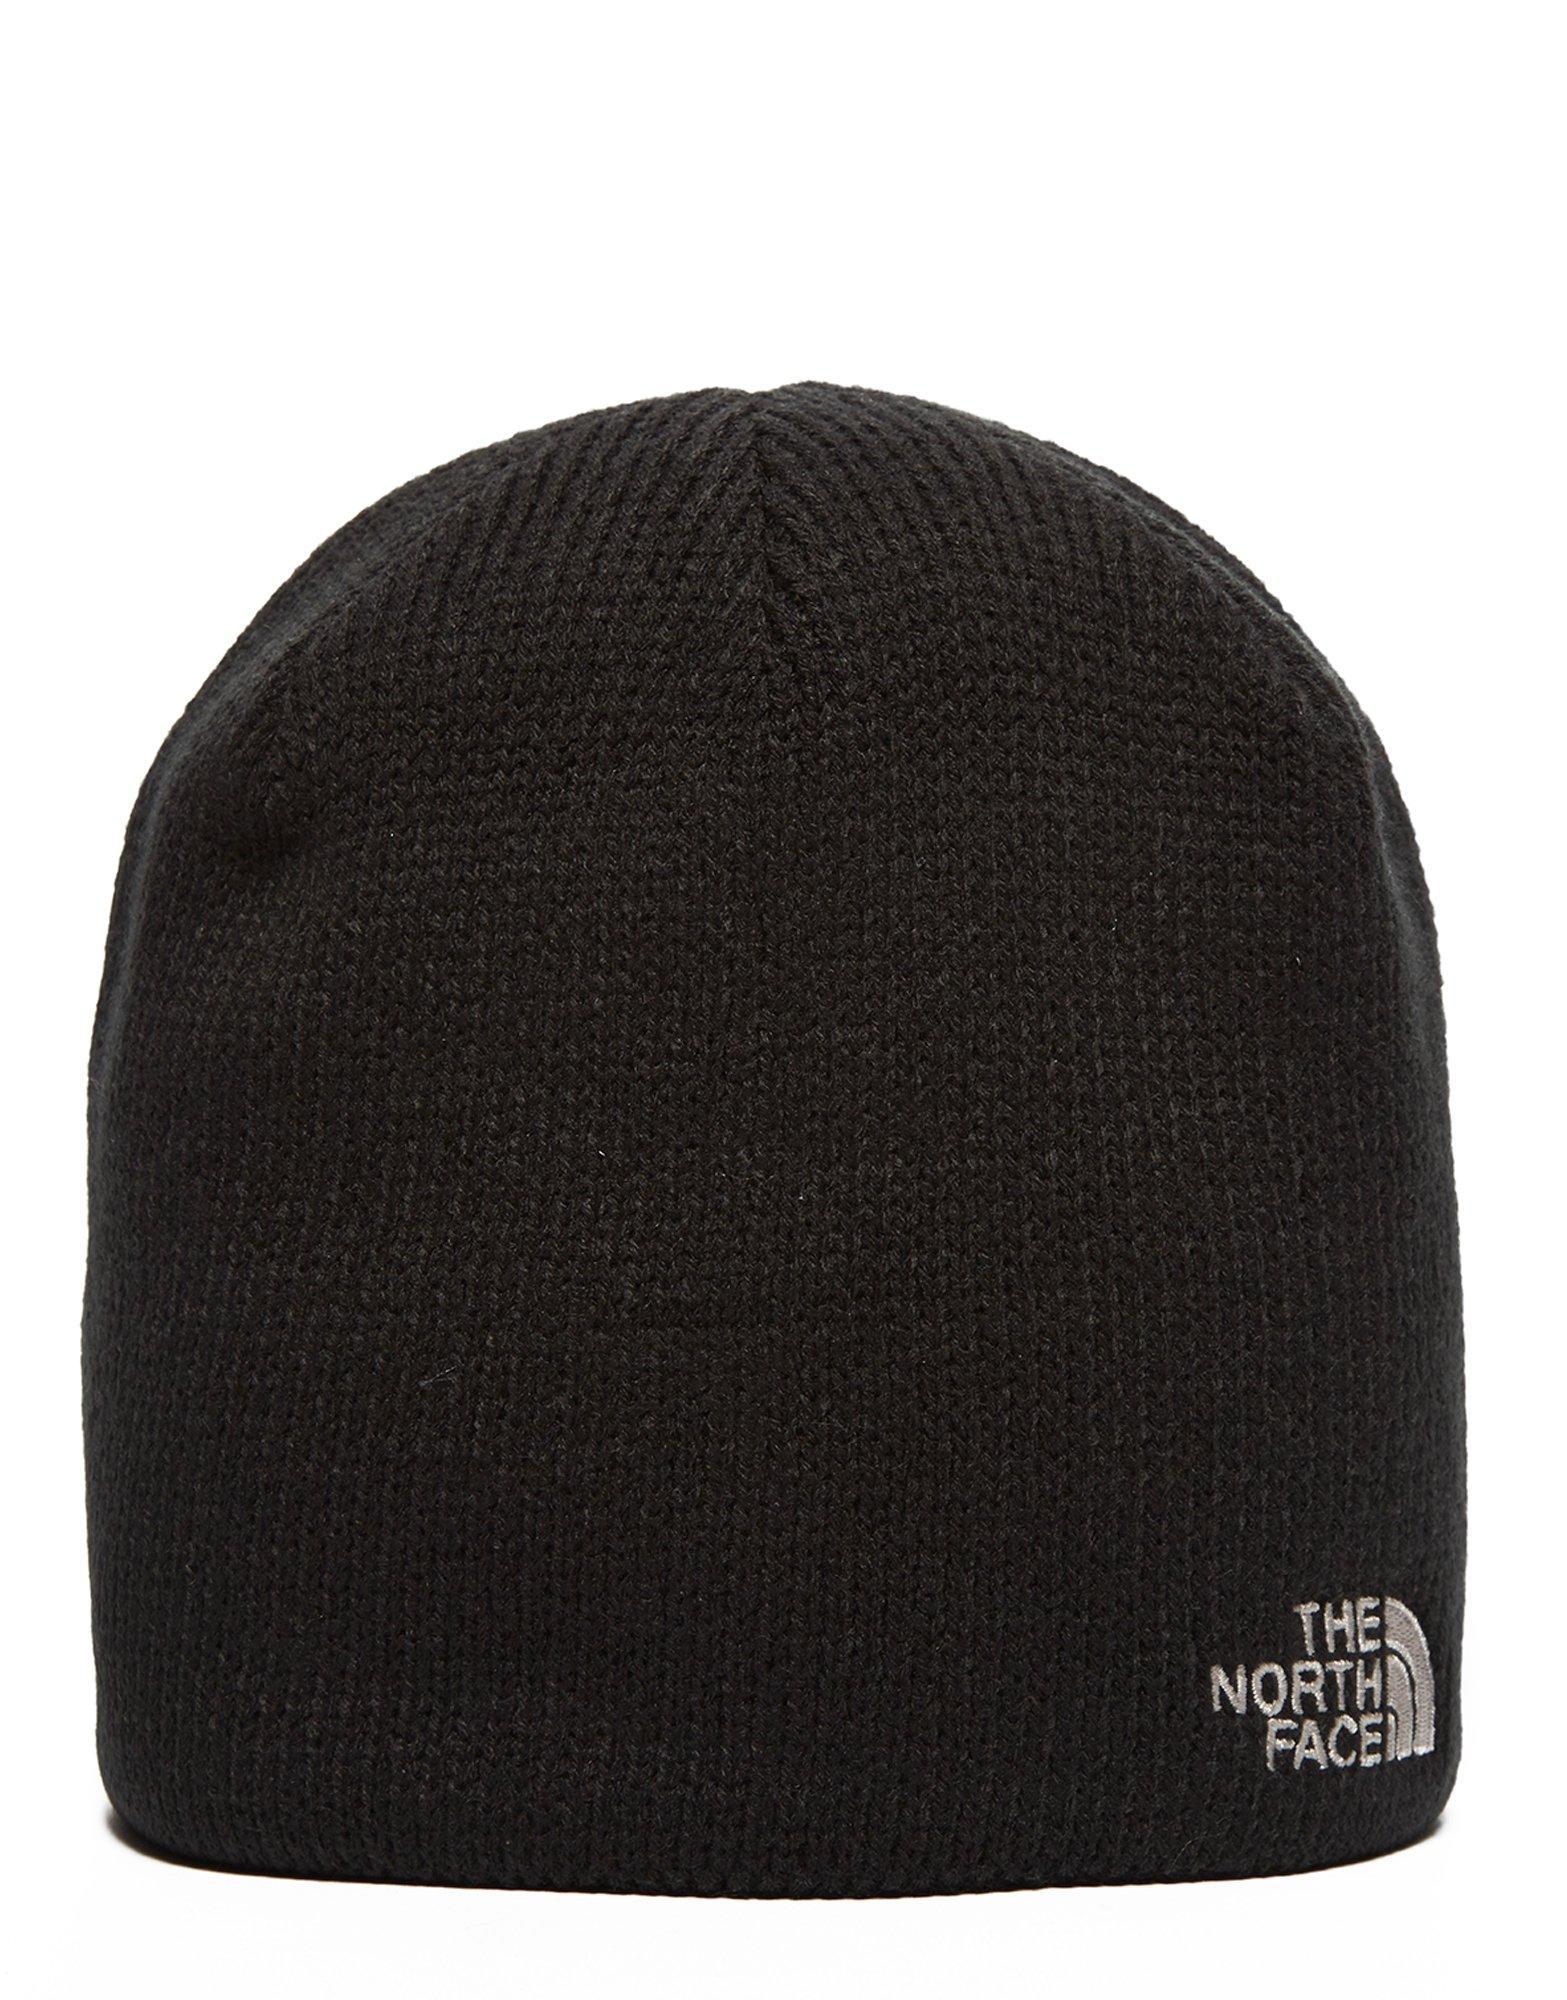 The North Face Synthetic Bones Beanie Hat in Black for Men - Lyst